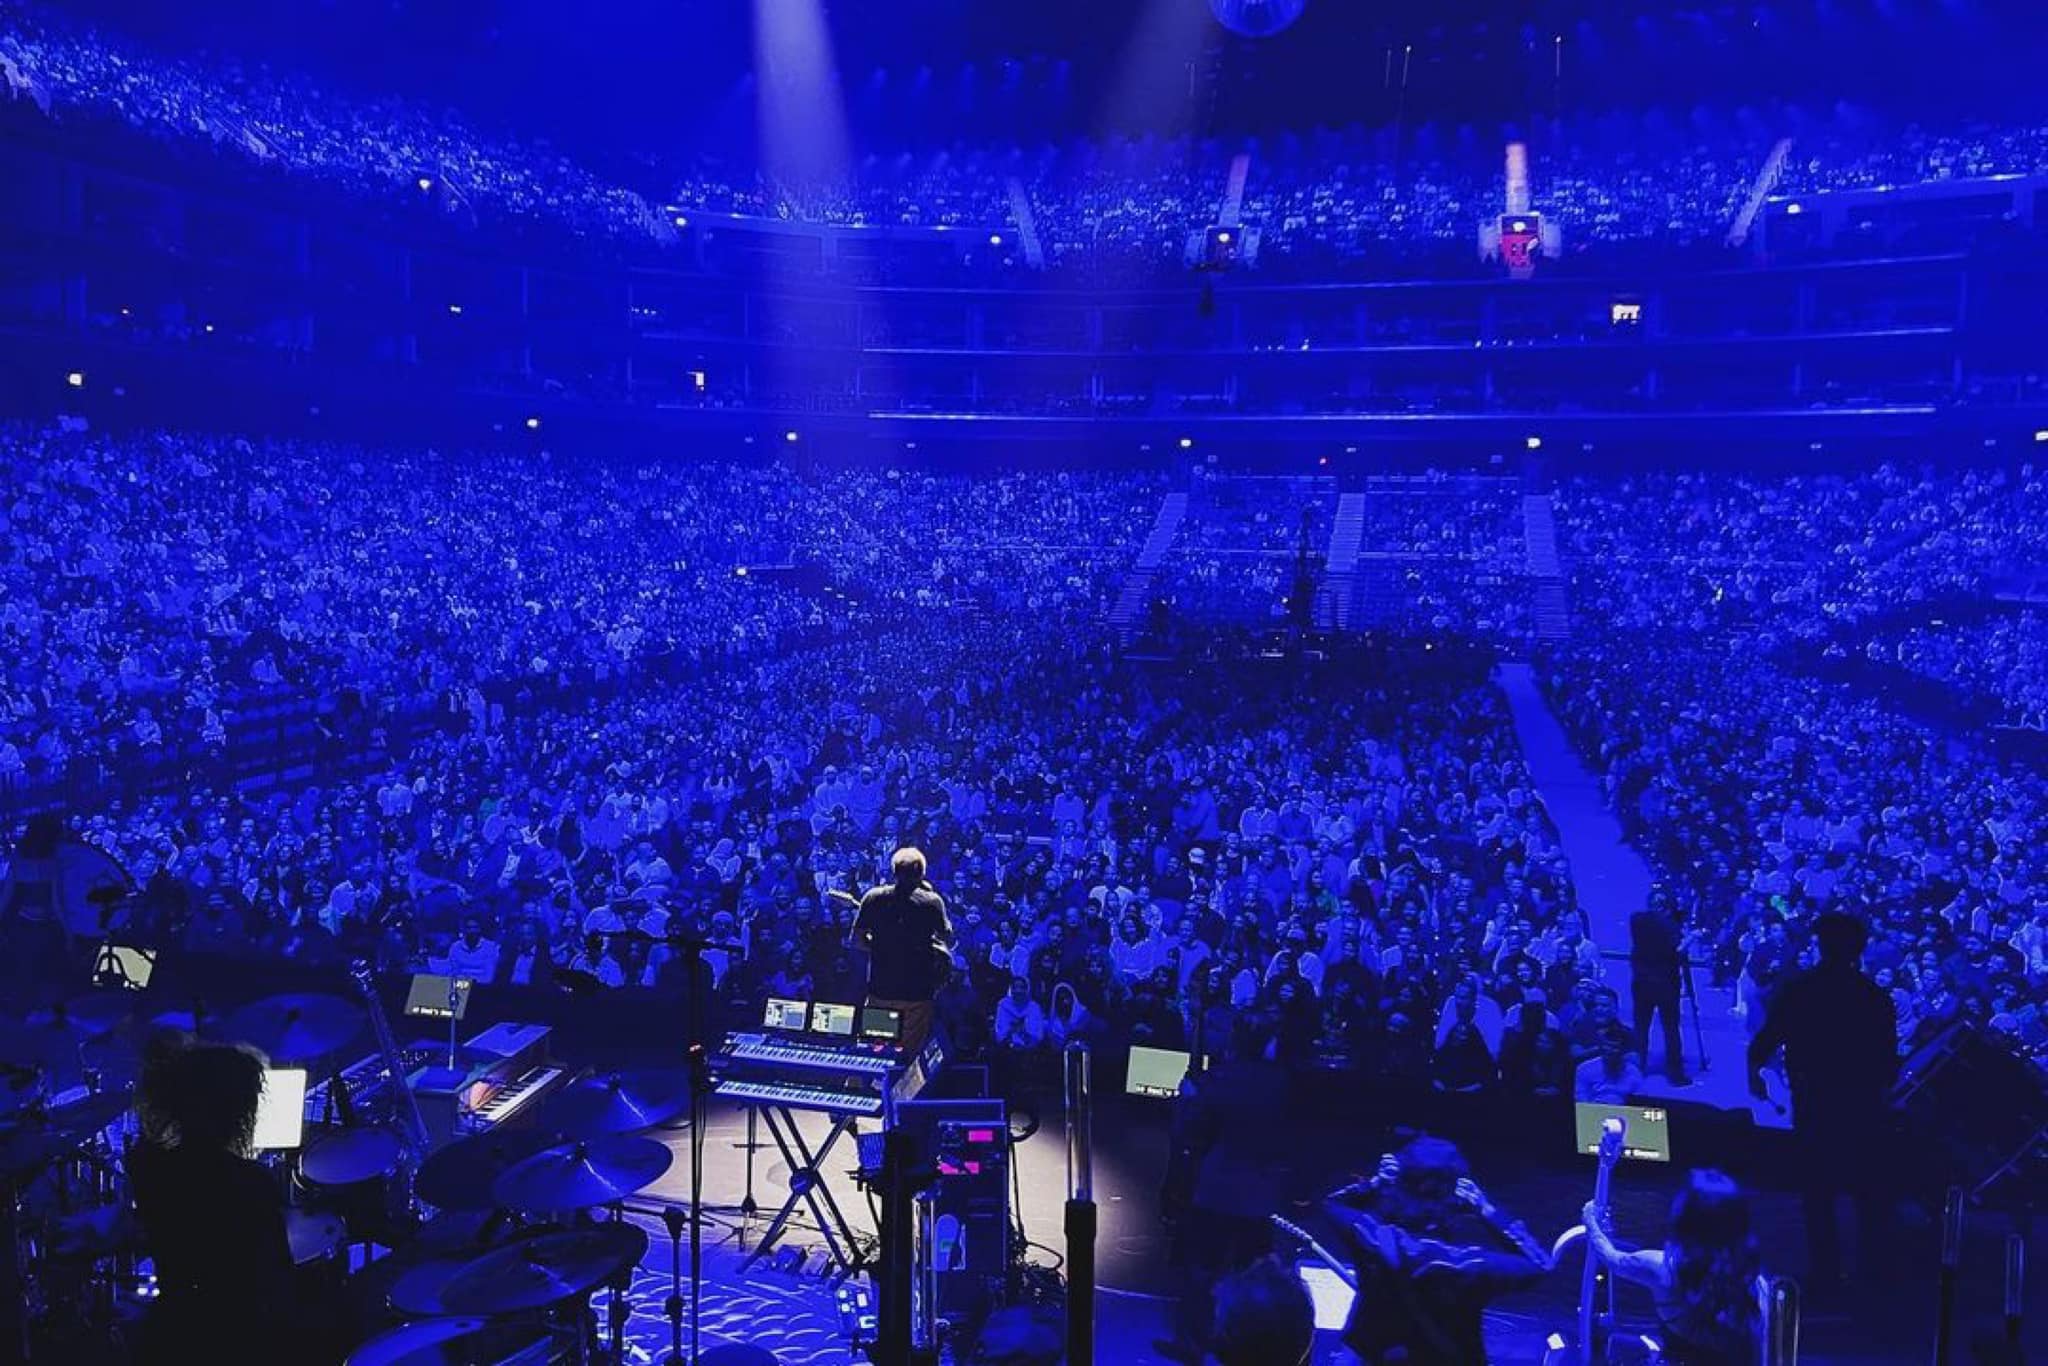 PRG delivered the show’s lighting, rigging and automation system for Hans Zimmer Live